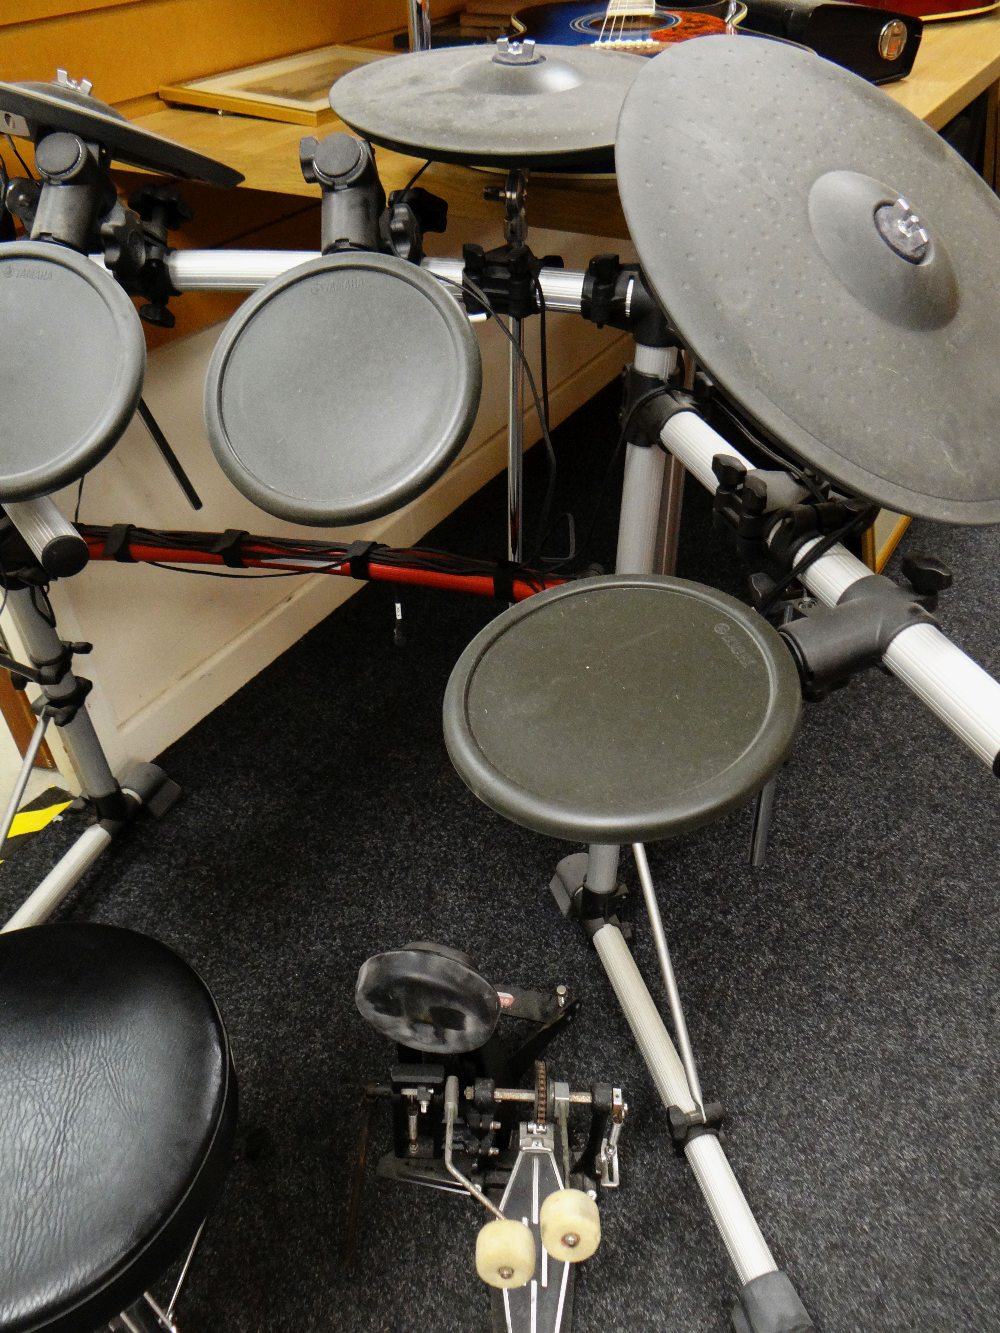 YAMAHA DTXPRESS III ELECTORNIC DRUM KIT, three drums pads, three cymbal pads, high hat cymbal pad - Image 3 of 10